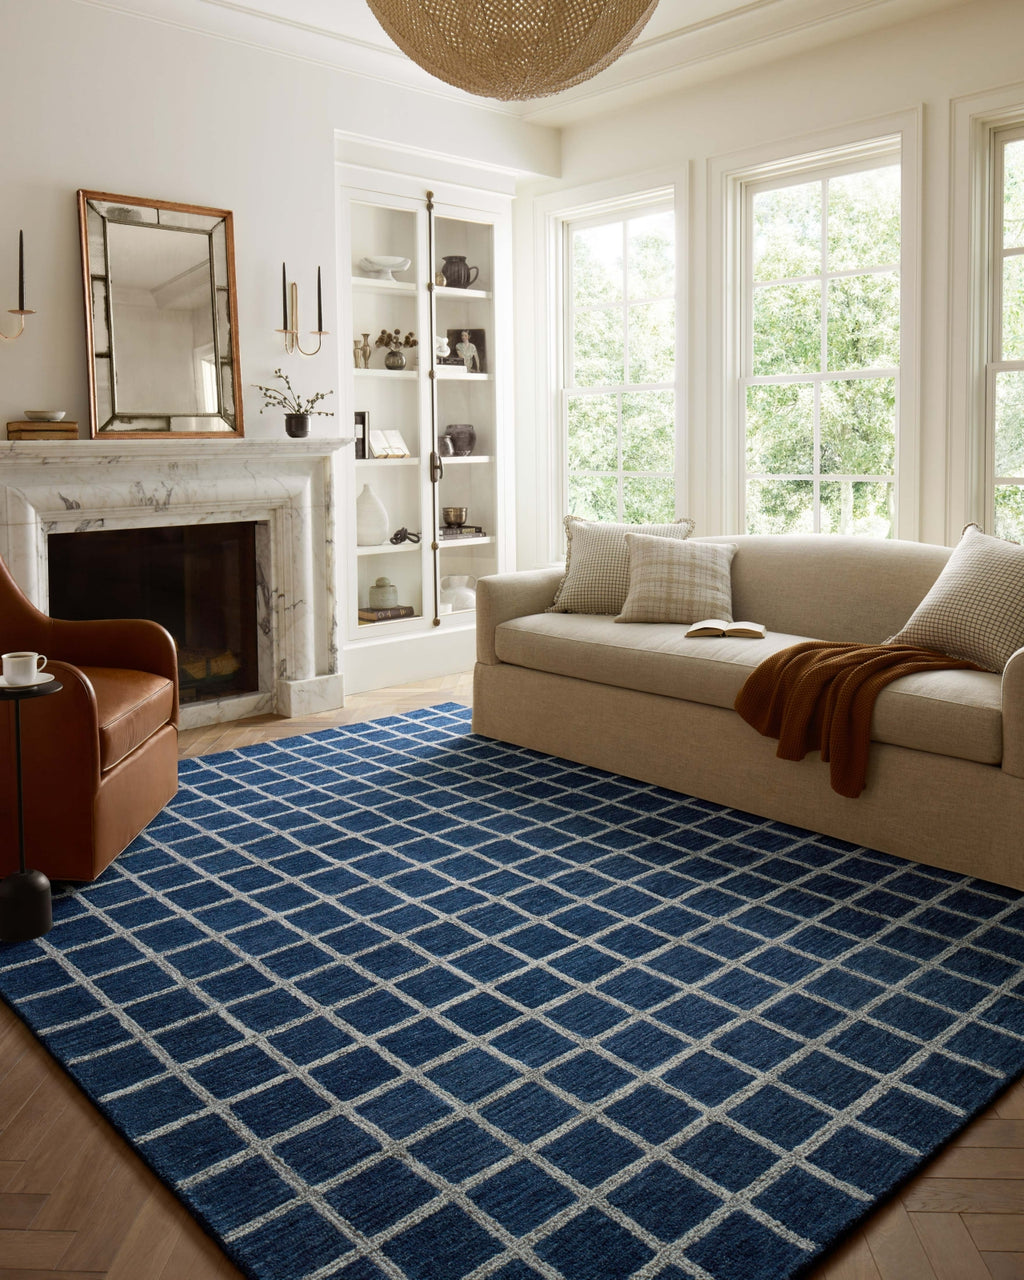 Polly POL-05 Navy/Silver Area Rug by Chris Loves Julia x Loloi Lifestyle Image Feature